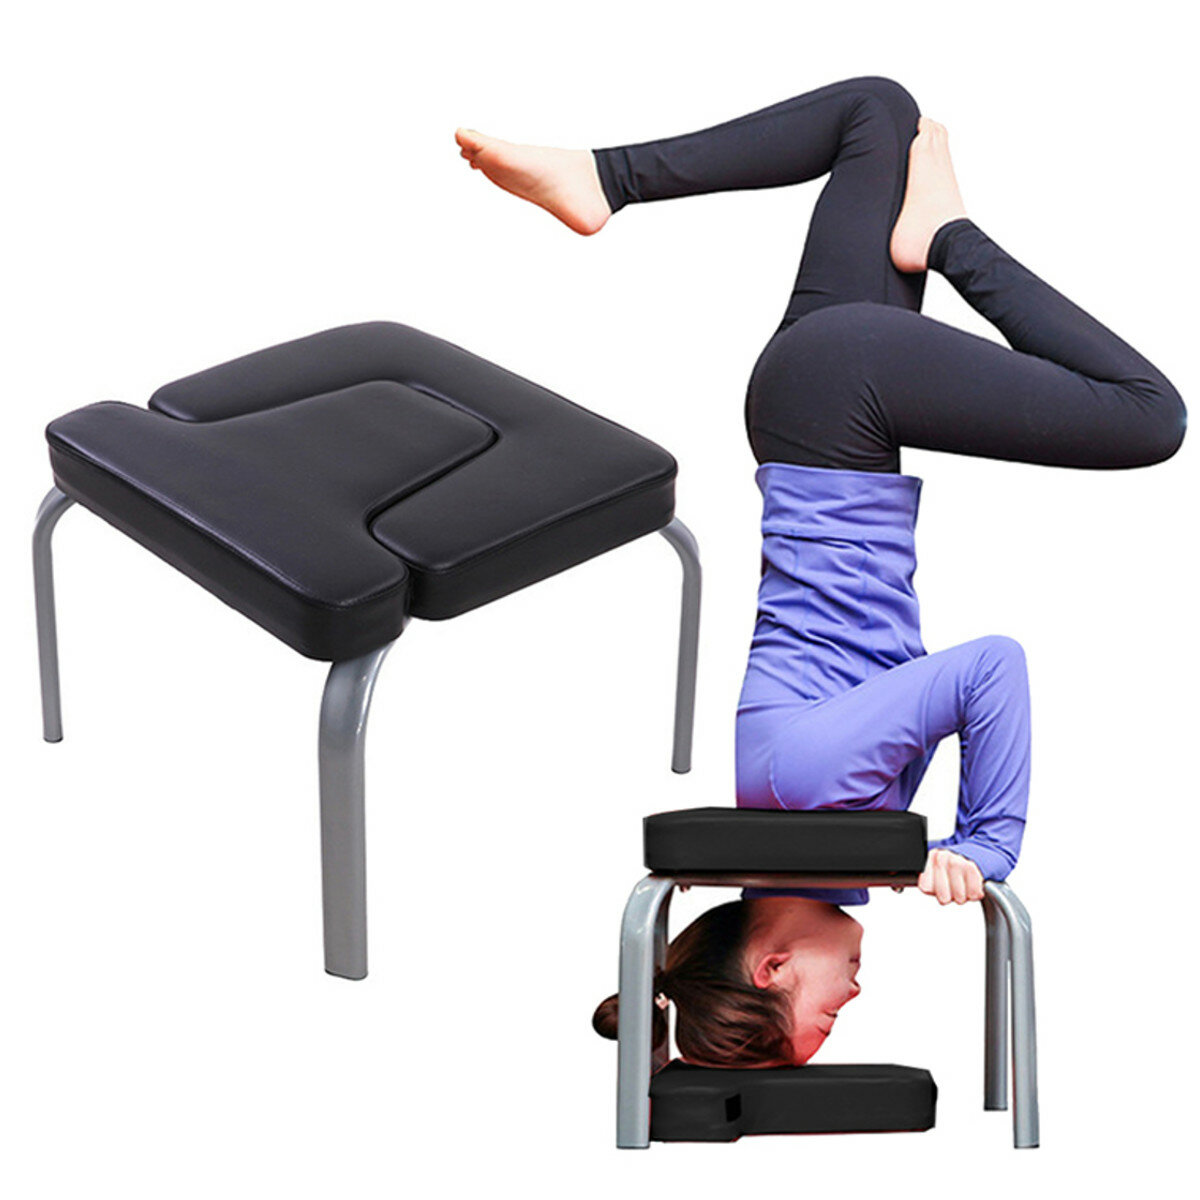 Yoga Headstand Chair Core Strength Inversion Bench Relieve Fatigue Build...